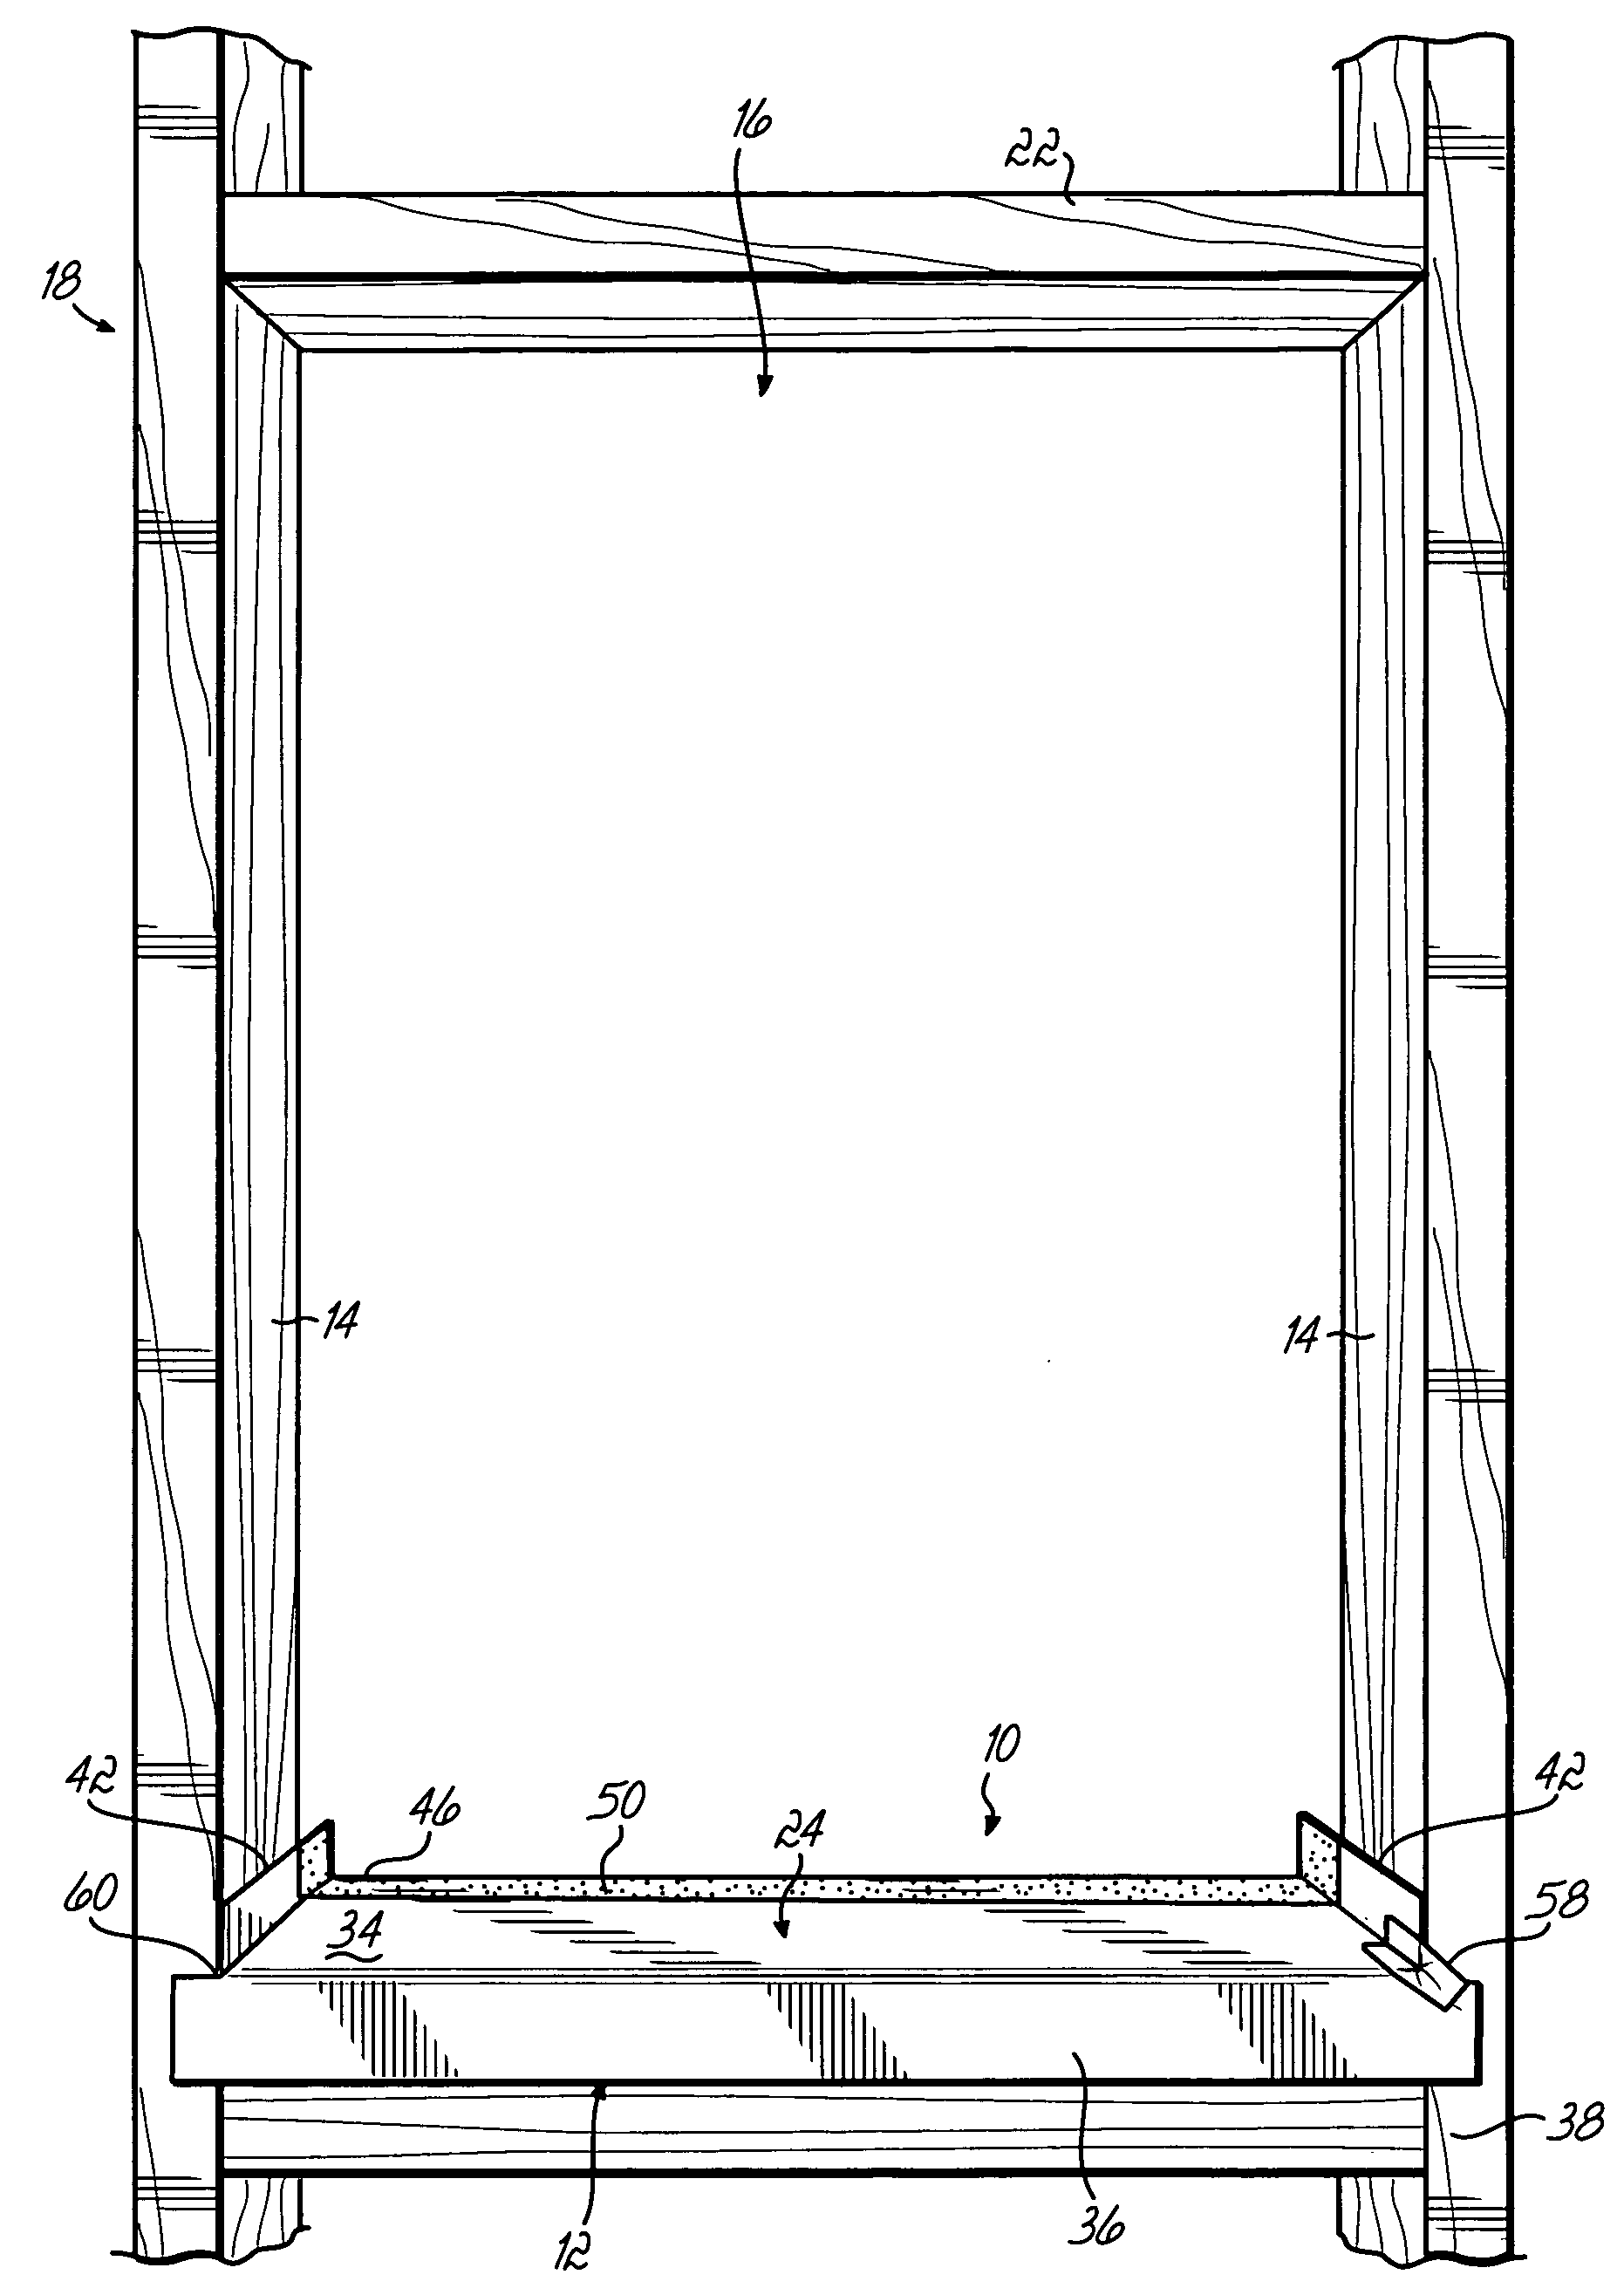 Sill pan flashing for doors and windows